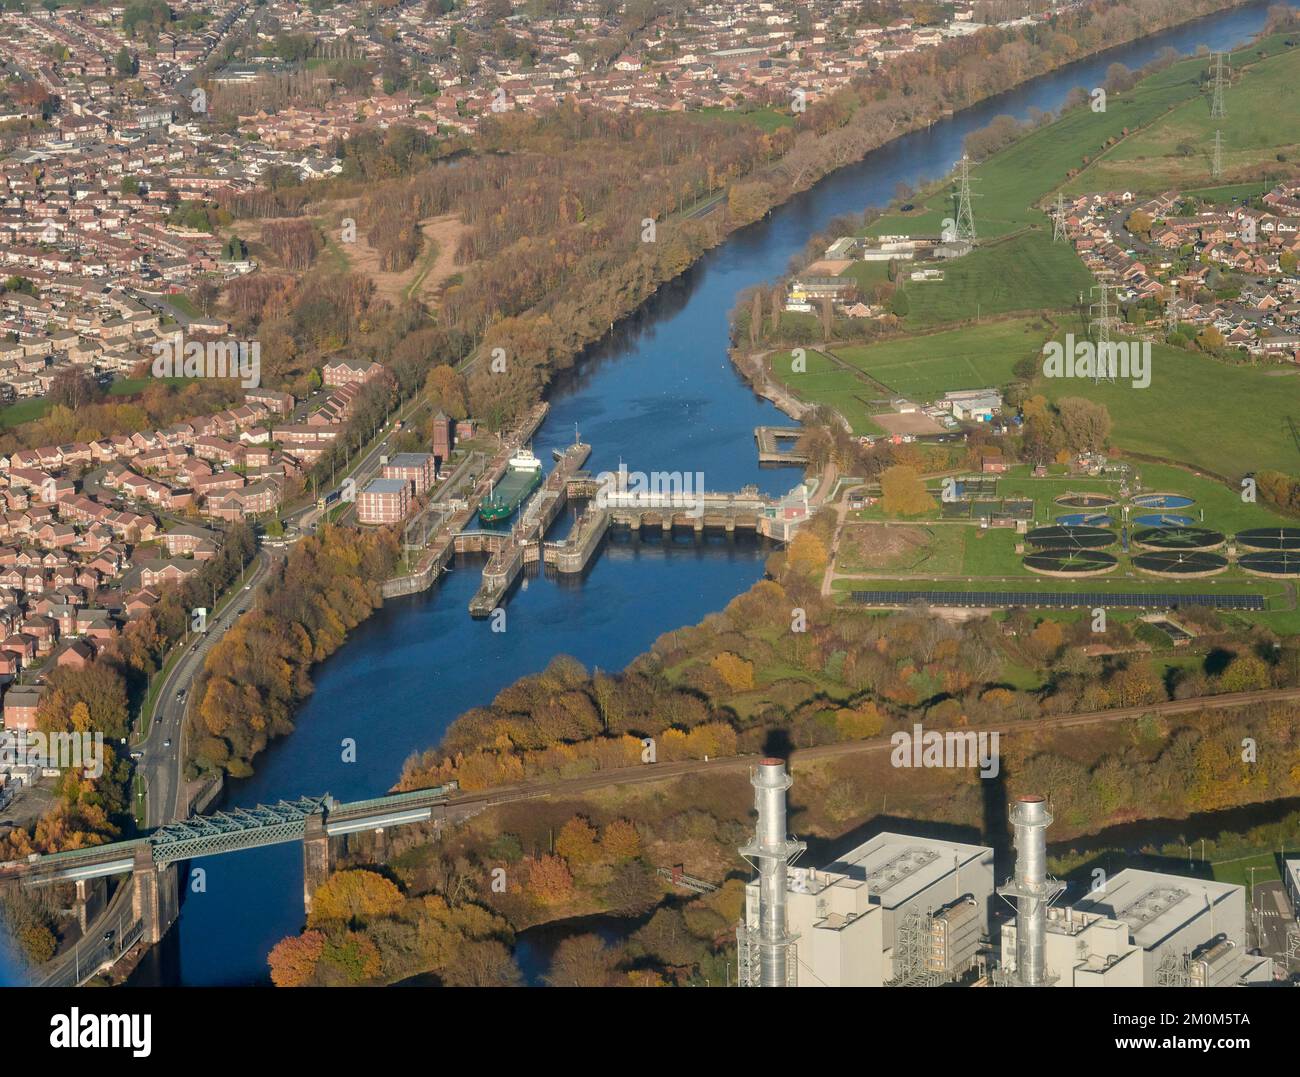 An aerial view of a lock on the Manchester Ship Canal, with a ship going down stream, at Irlam. West of Manchester. north west England, UK Stock Photo